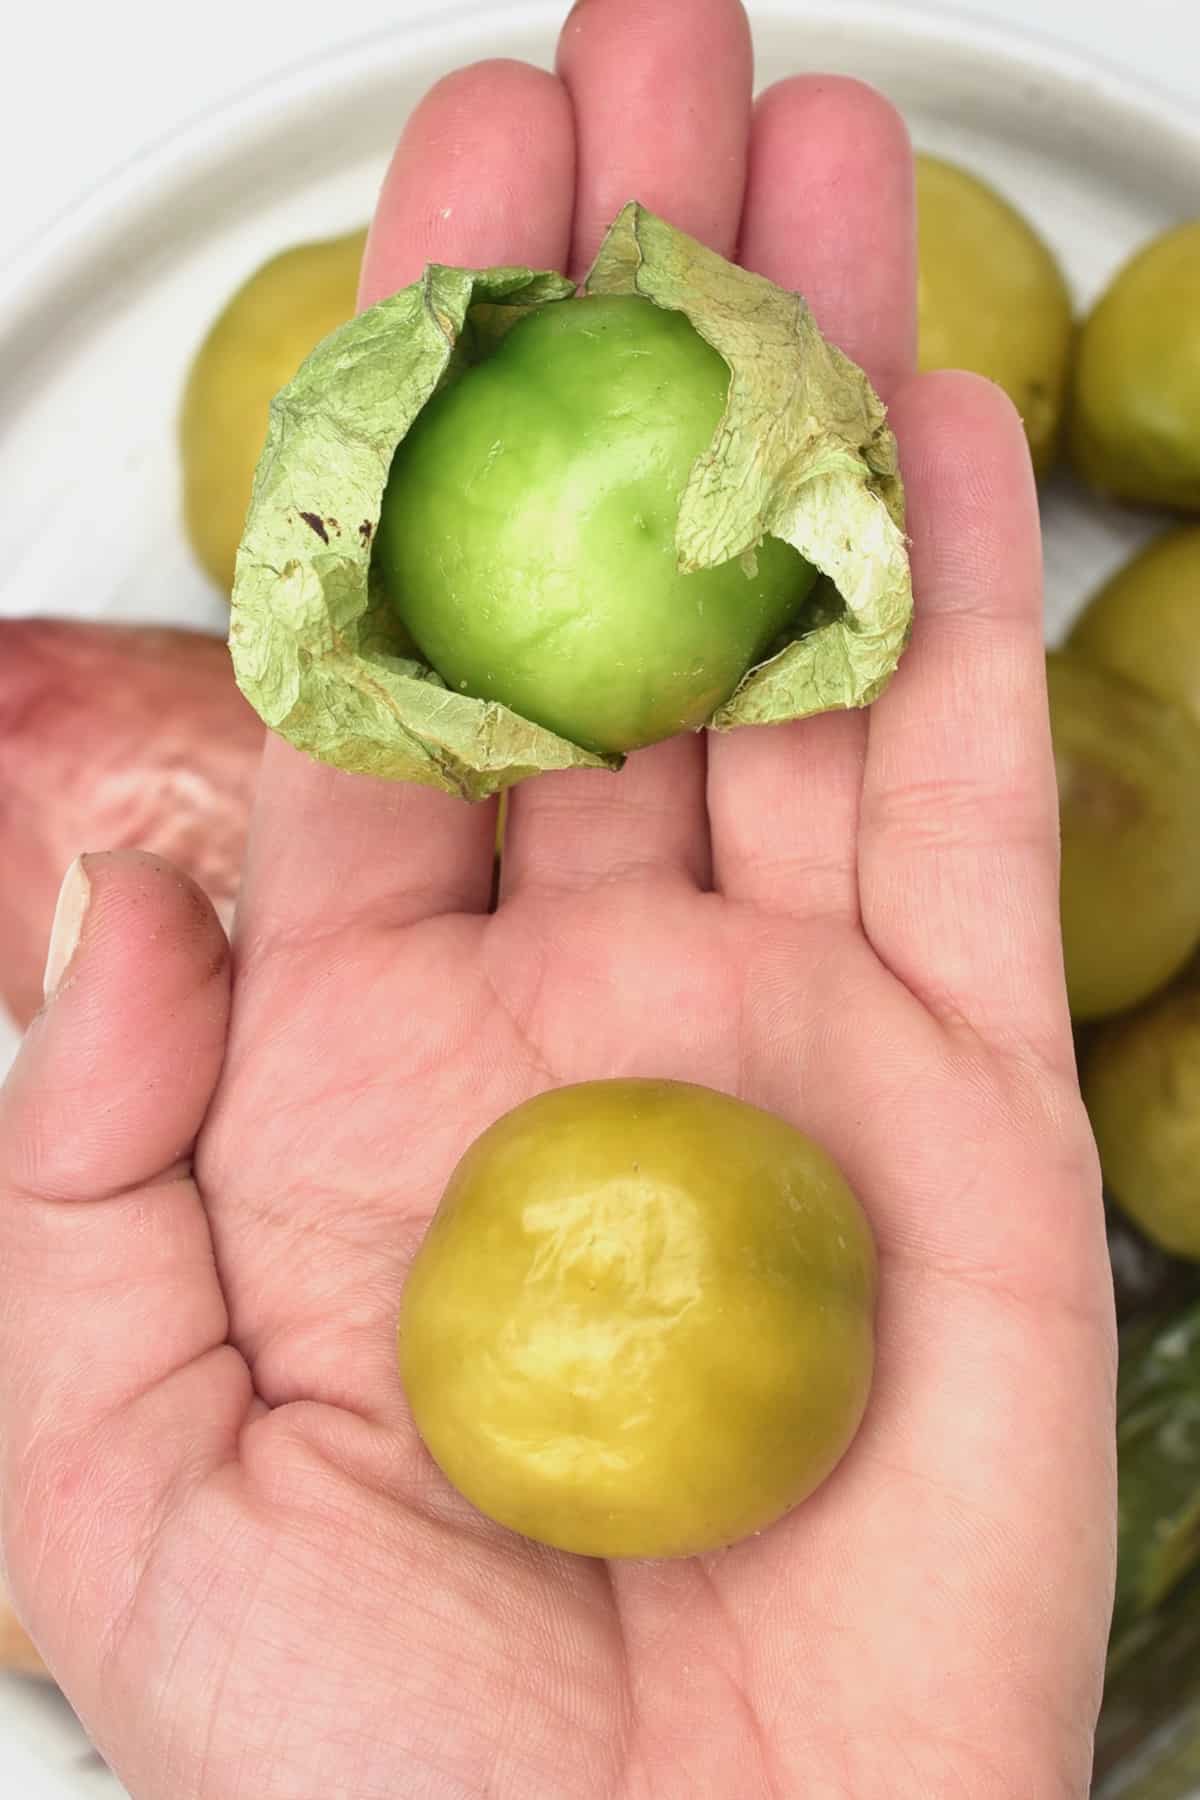 Cooked vs raw tomatillos in a hand